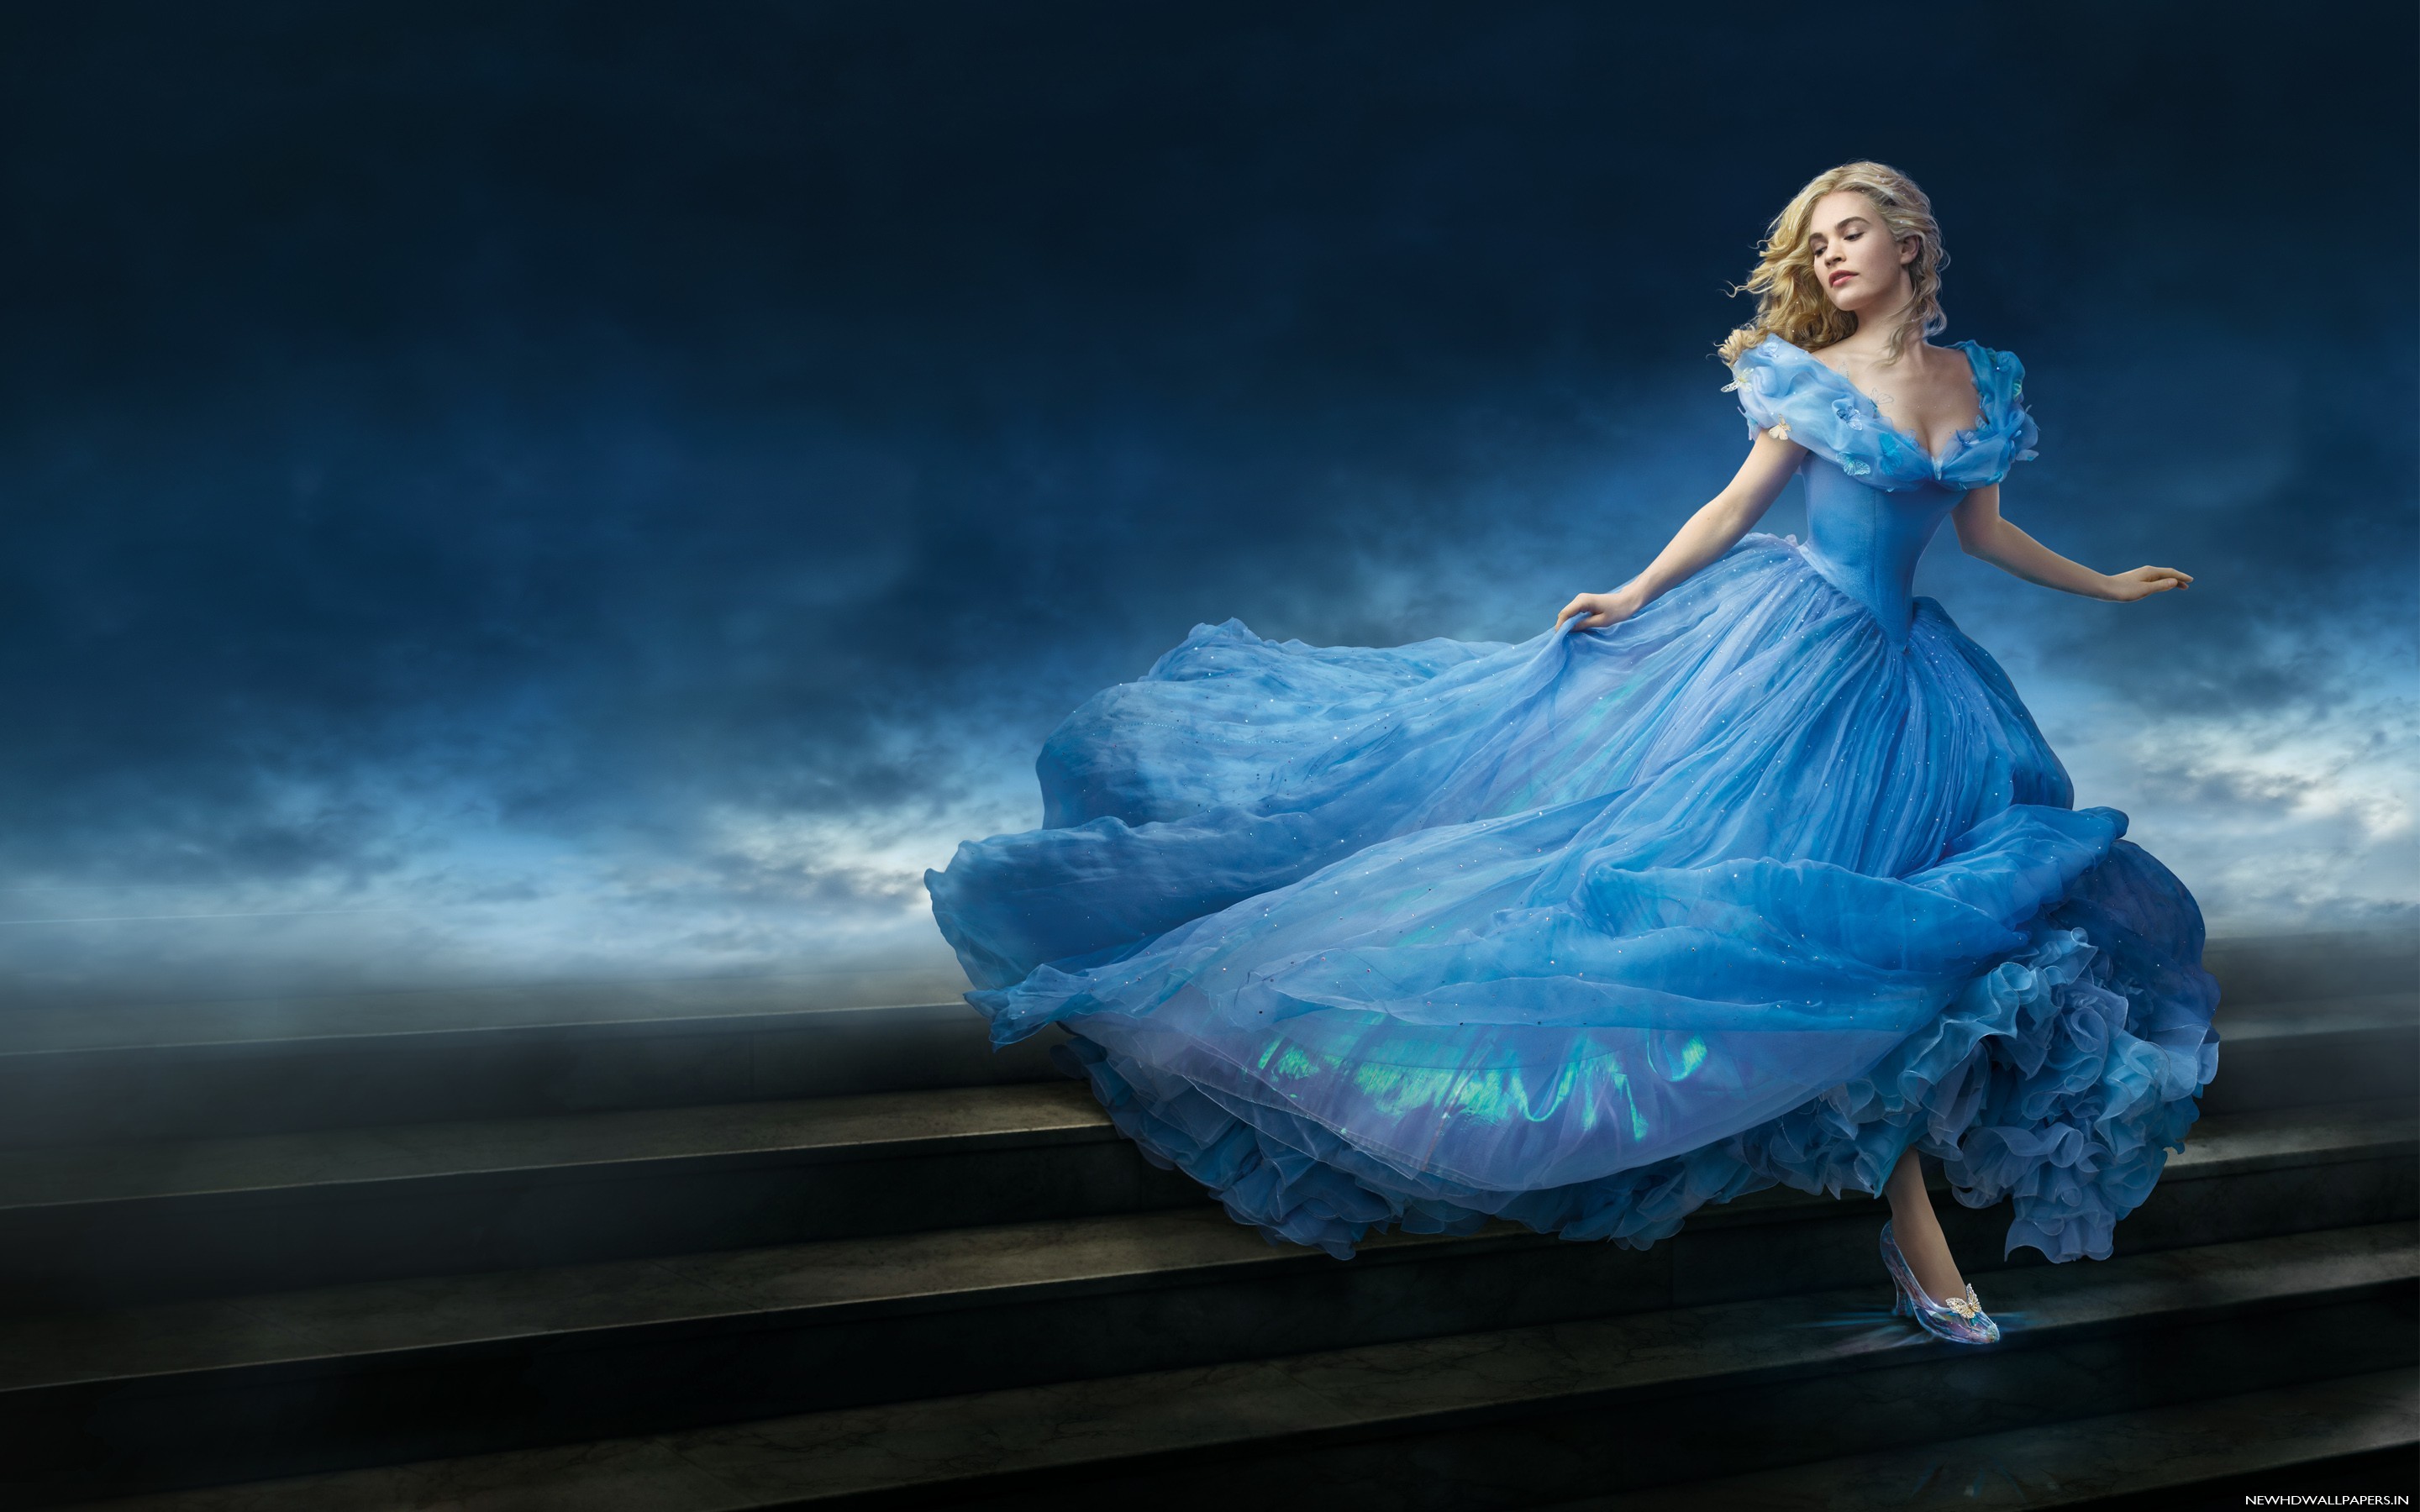 Lily James as Cinderella Movie Wallpaper   New HD Wallpapers 2880x1800